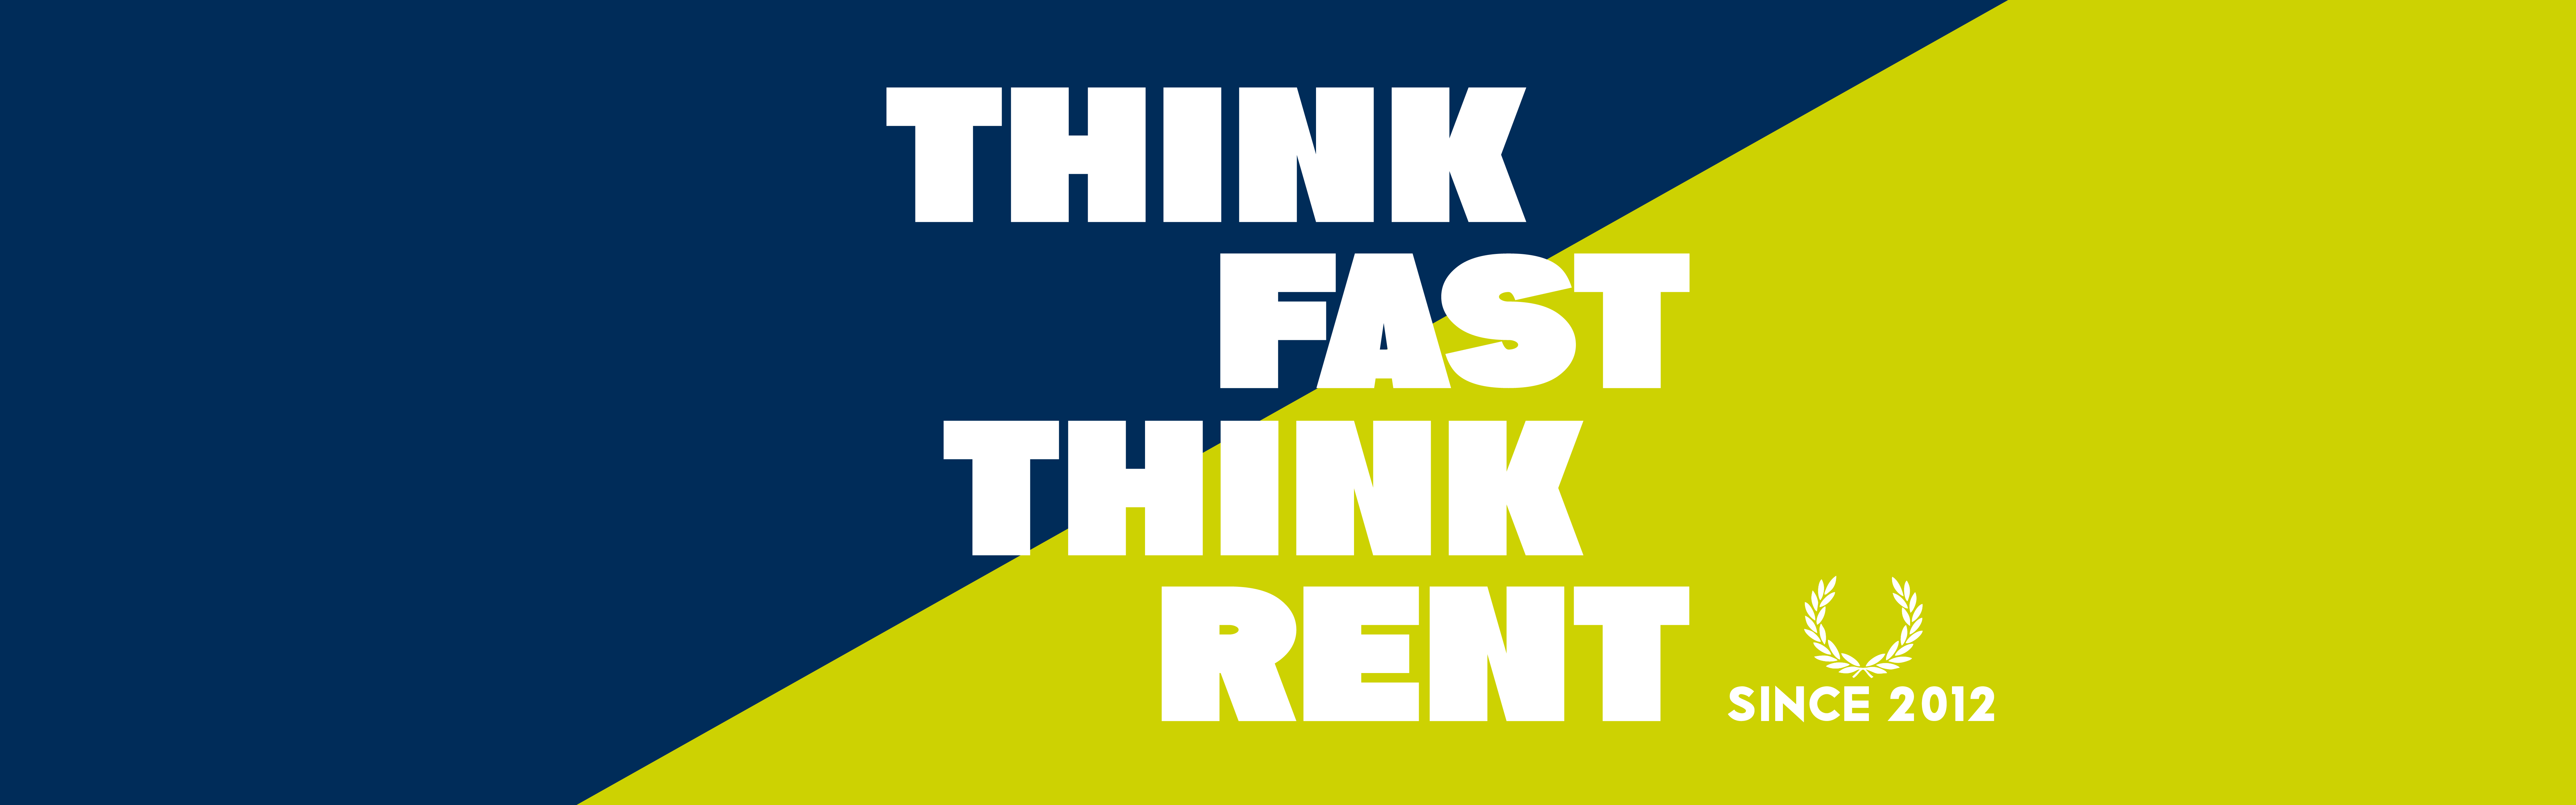 Rodini Rental Systems - Think Fast Think Rent